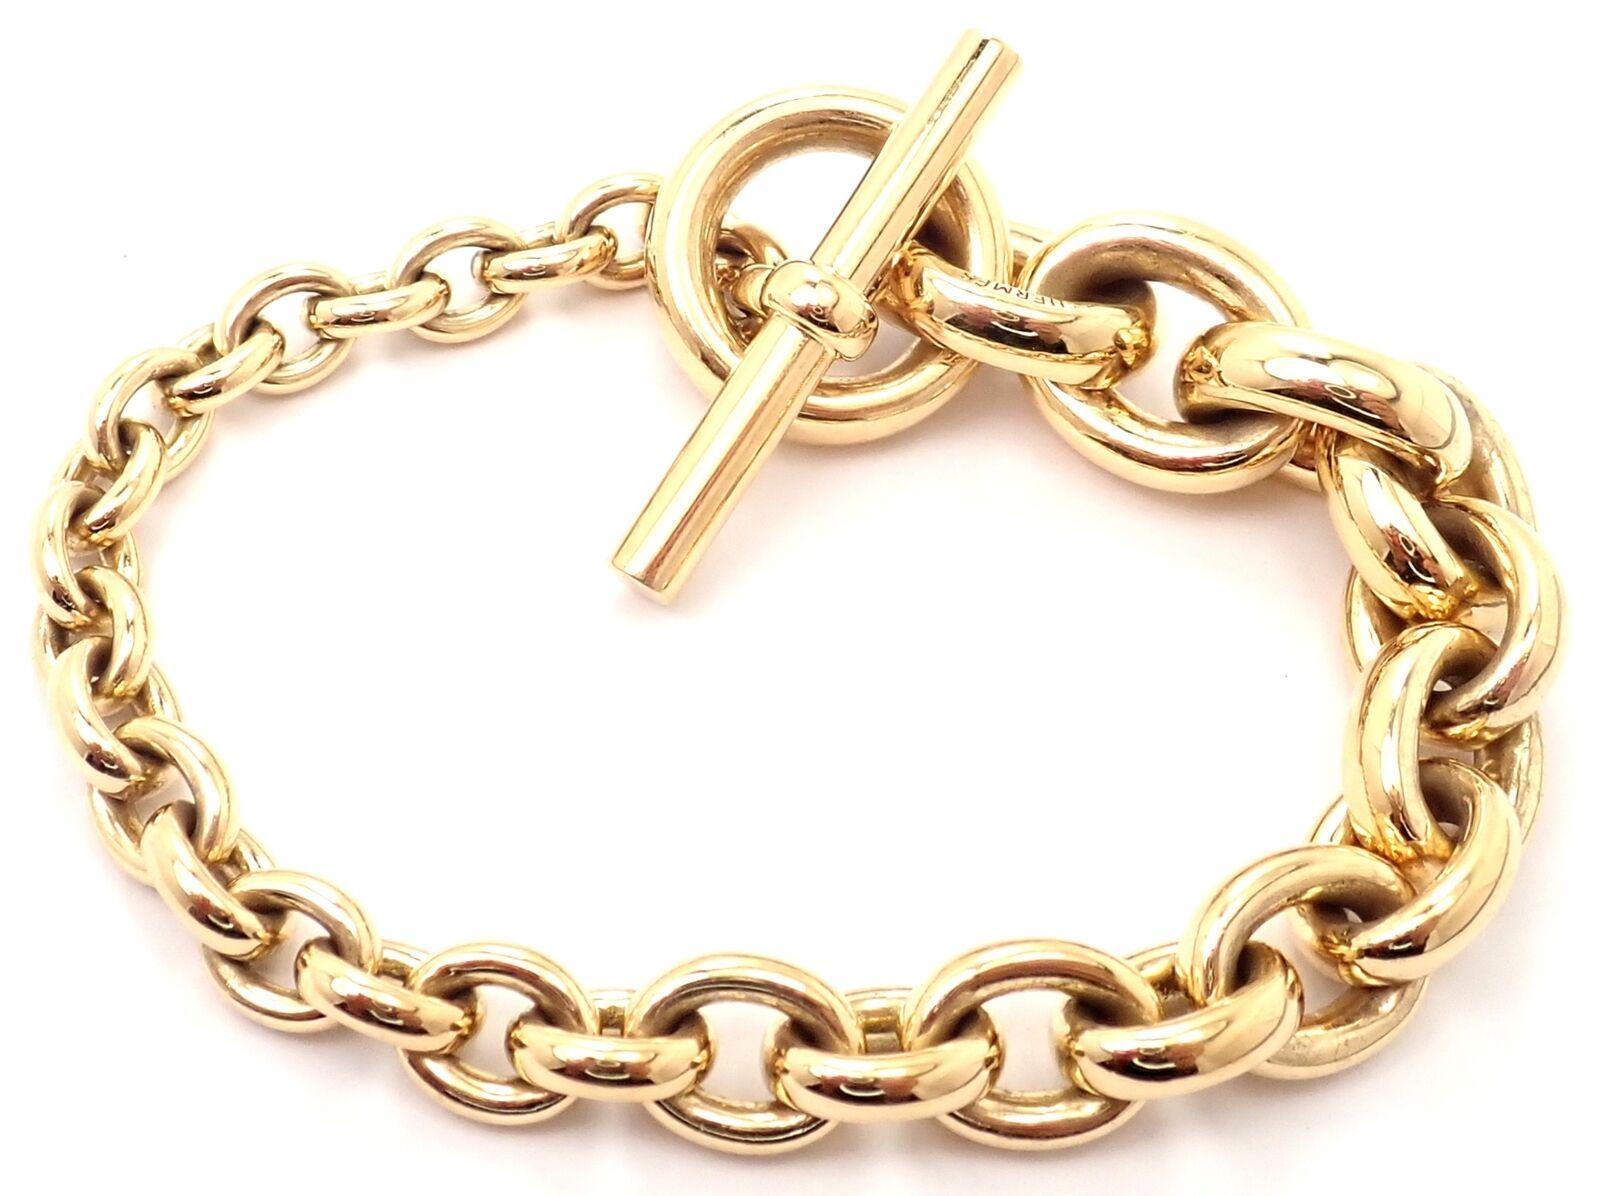 18k Yellow Gold Heavy Link Toggle Crescendo Bracelet by Hermes.
Details:
Weight: 83.6 grams
Length: 8